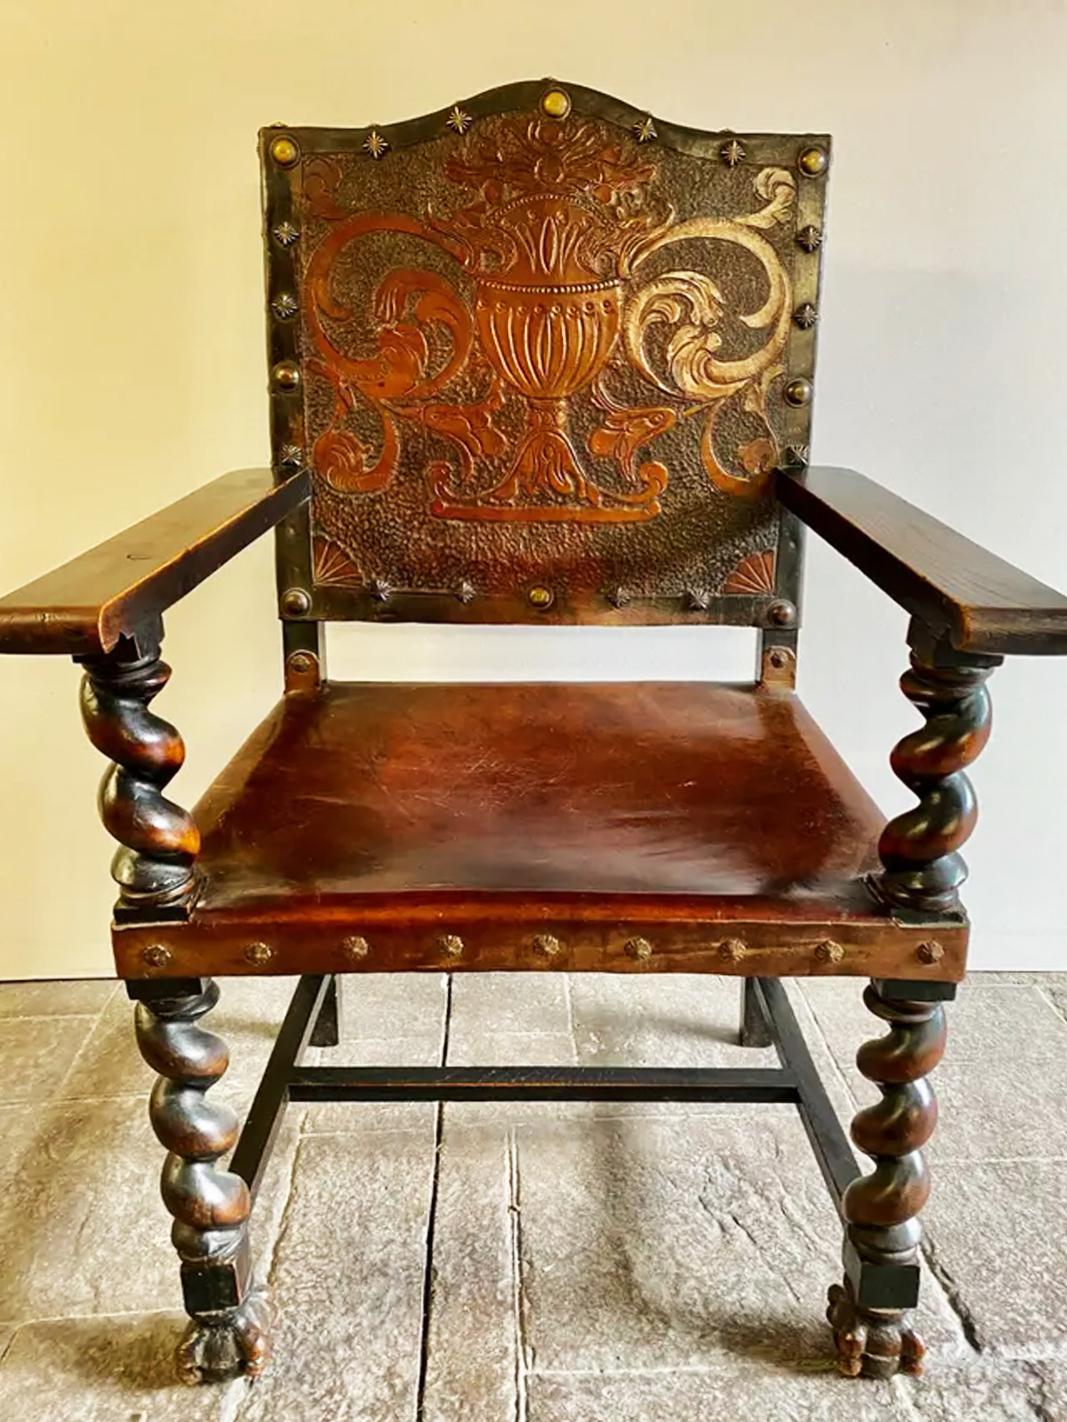 Carved Set Dining Chairs Barley Twist Renaissance Revival Throne, Turn of the Century For Sale